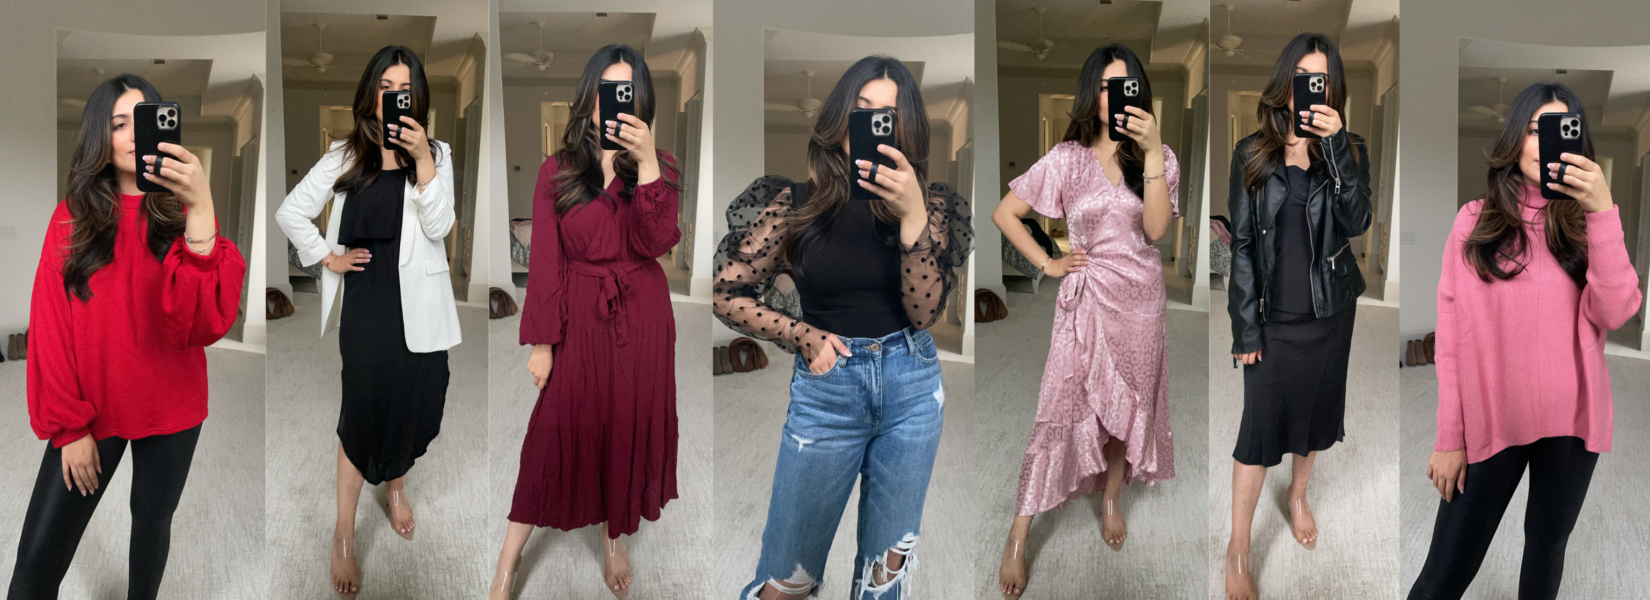 7 valentines outfits from amazon